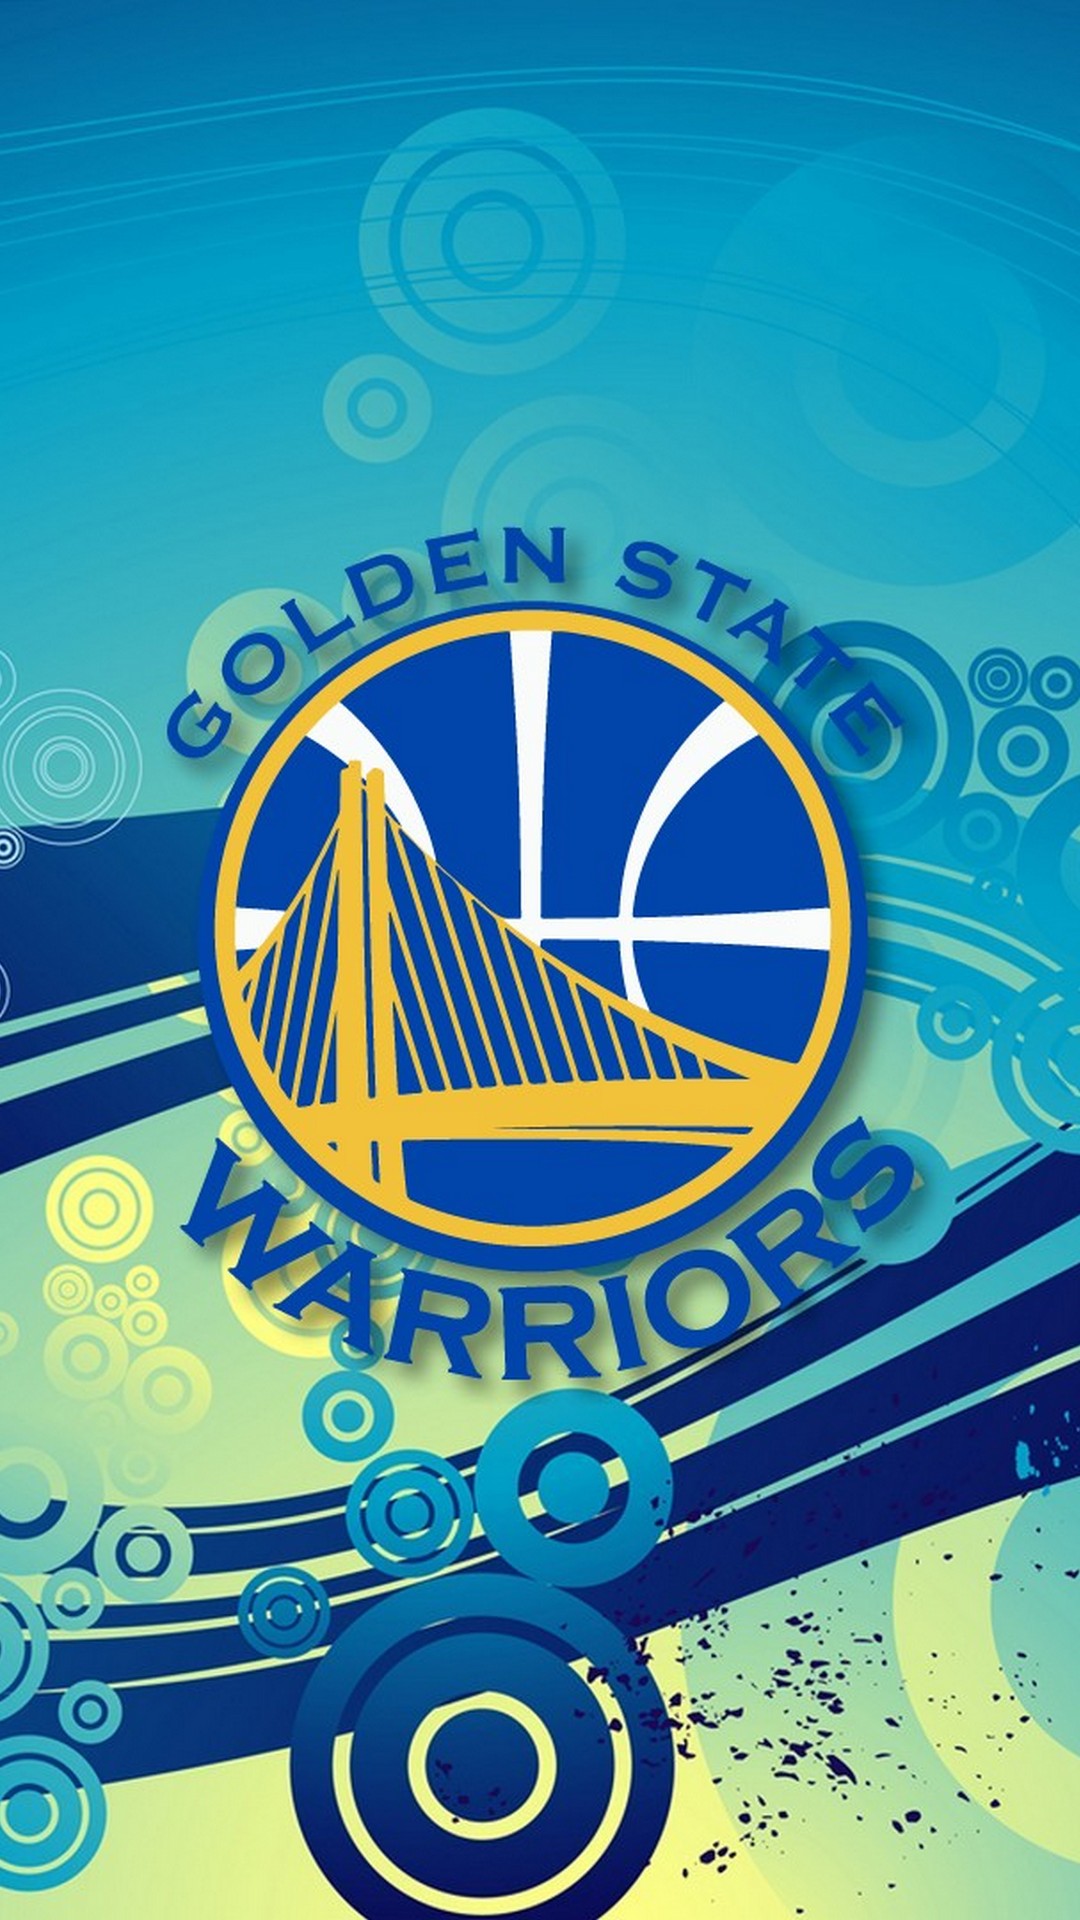 Mobile Wallpapers Golden State Warriors with image resolution 1080x1920 pixel. You can make this wallpaper for your iPhone 5, 6, 7, 8, X backgrounds, Mobile Screensaver, or iPad Lock Screen